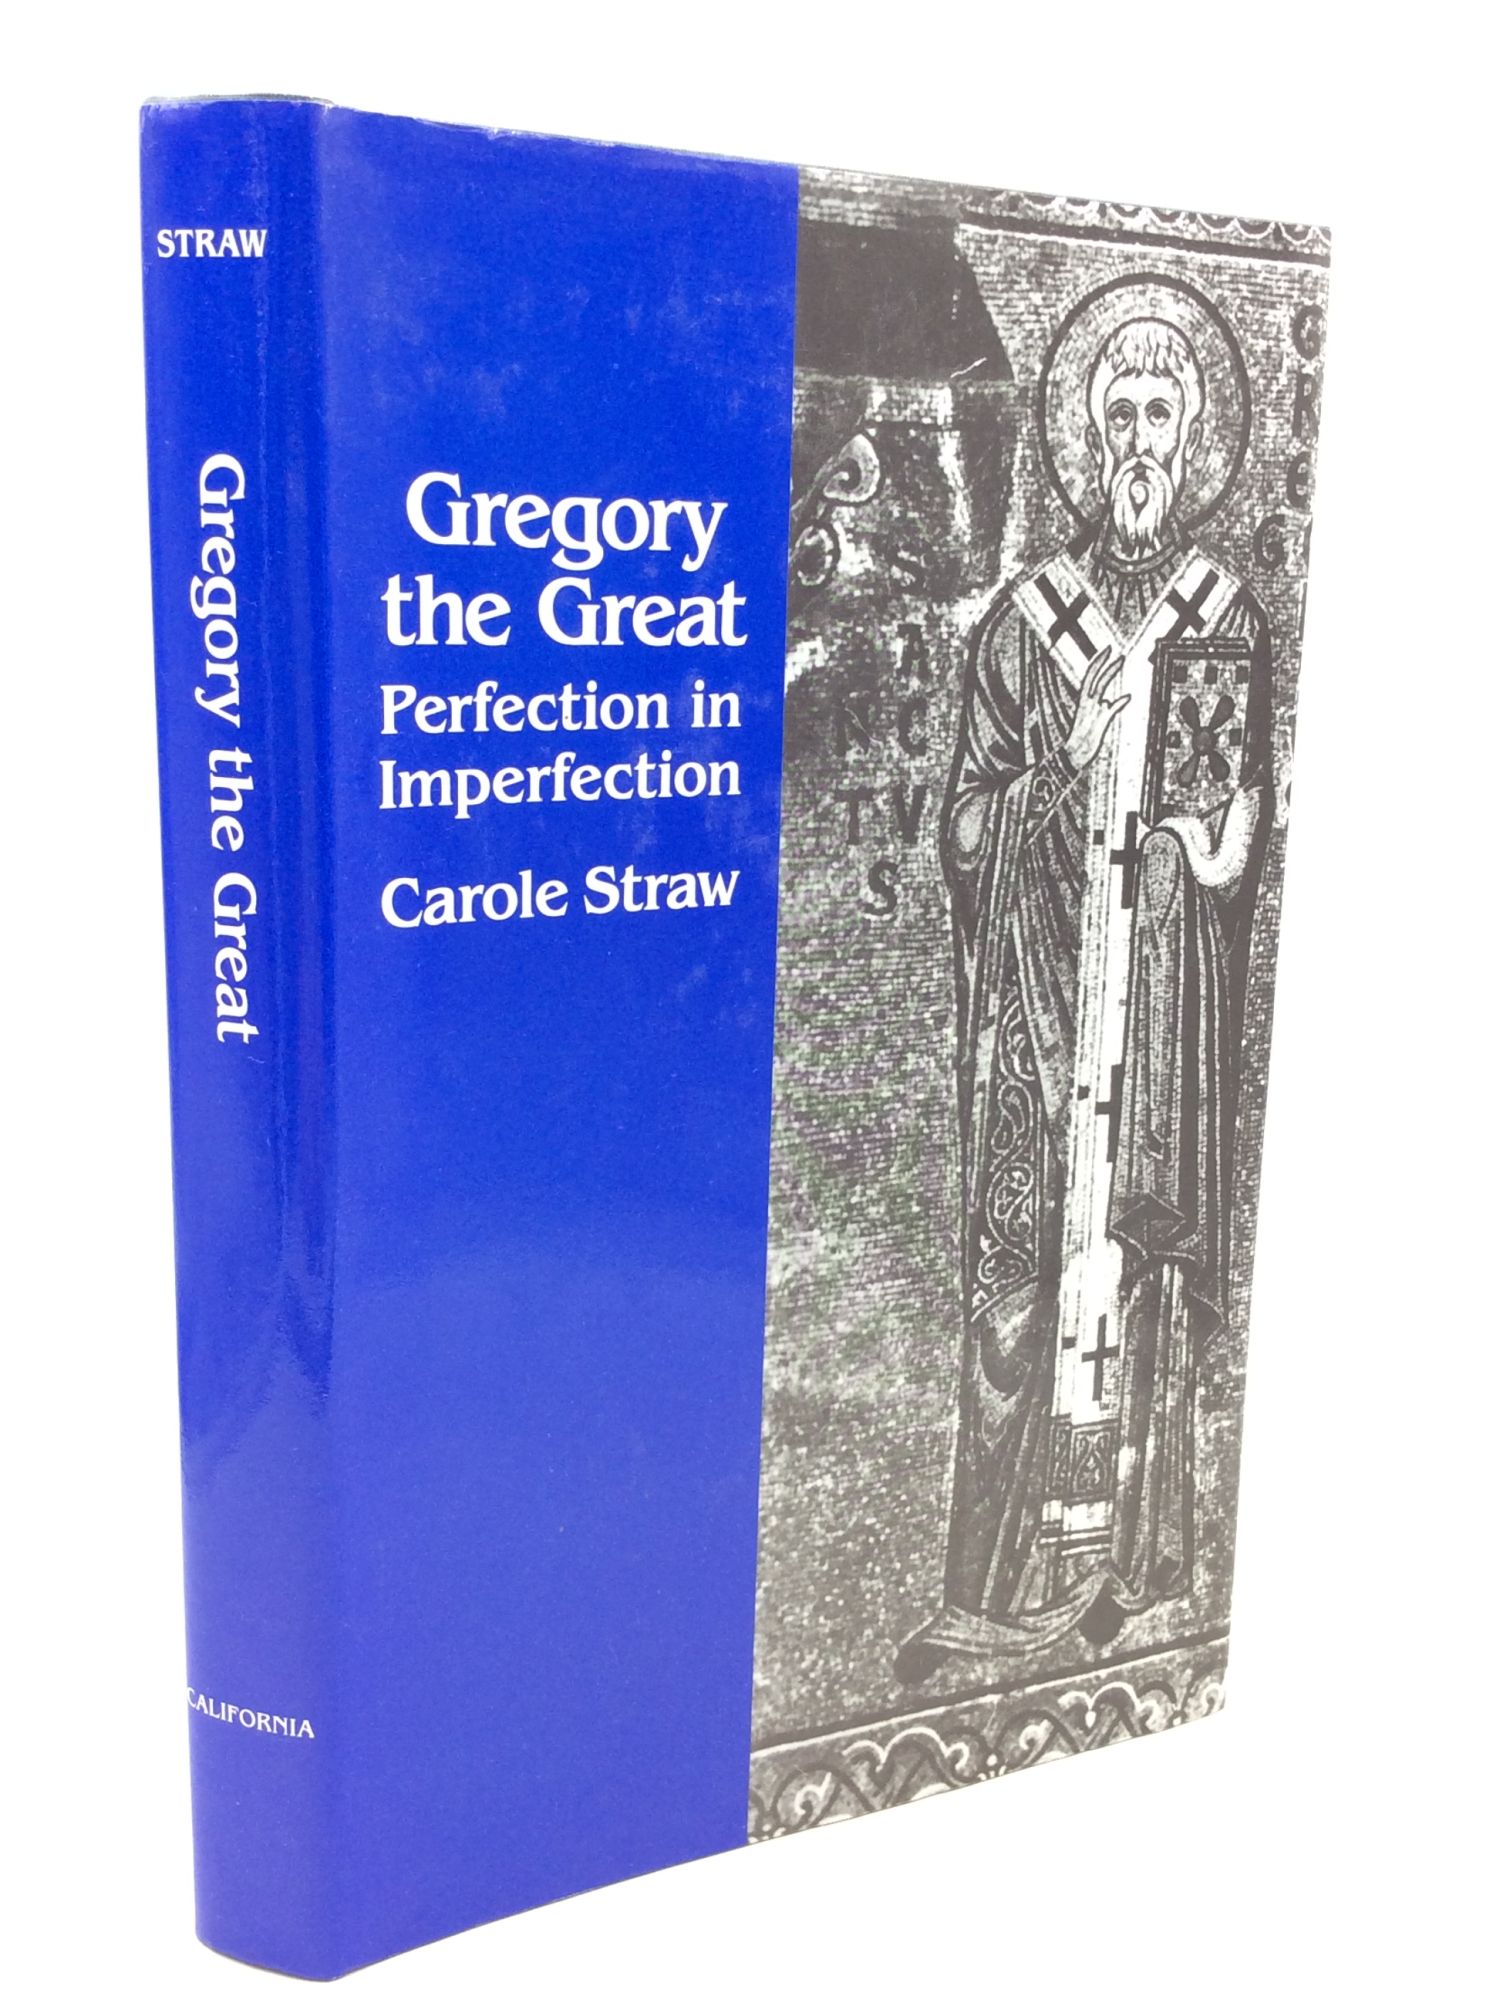 Carole Straw - Gregory the Great: Perfection in Imperfection